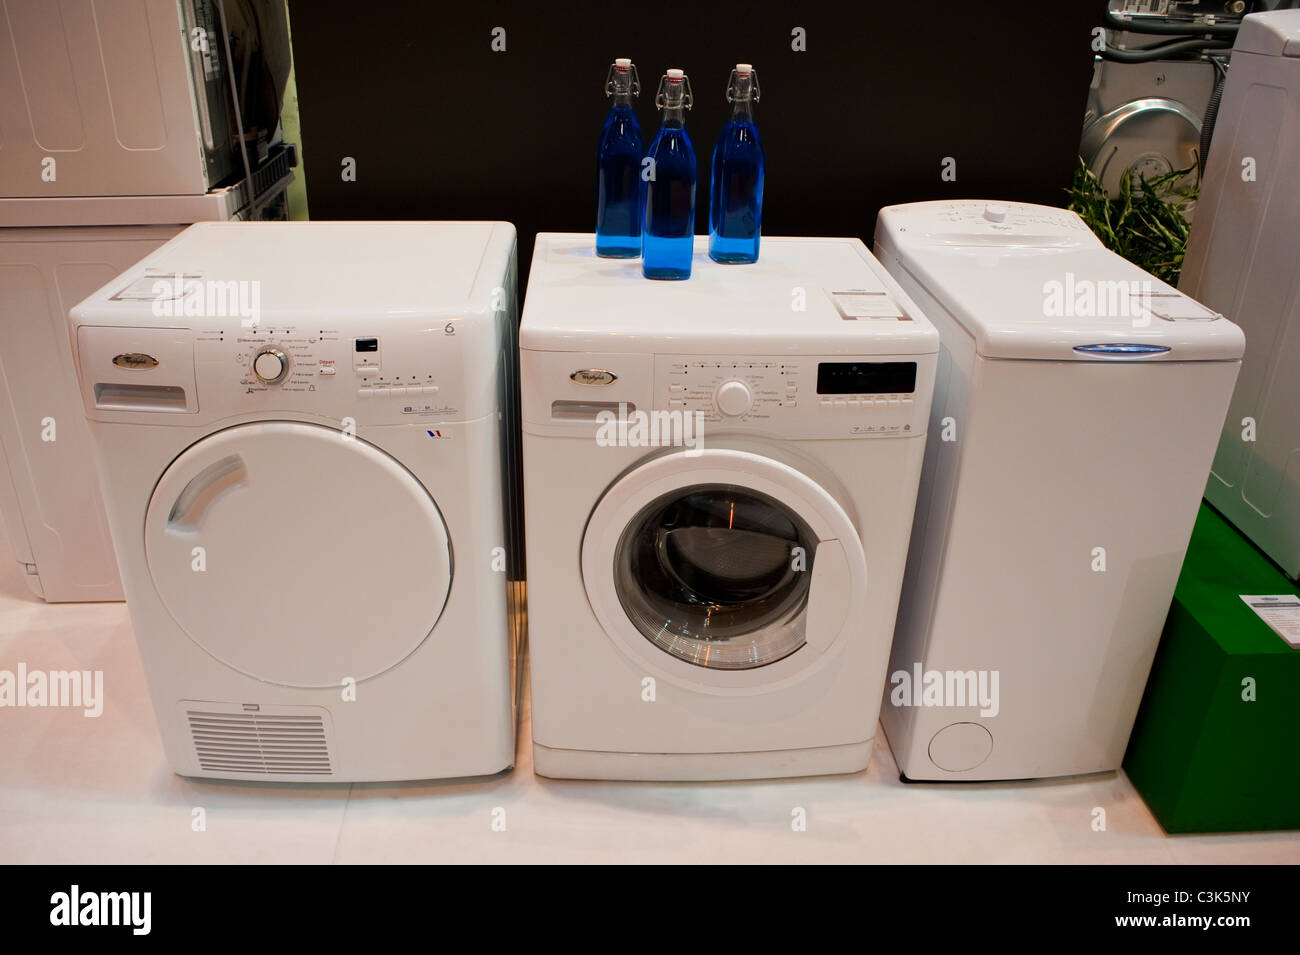 Paris, France, Water Saving Washing Machines at  Consumer Trade Show, 'Foire de Paris' Products on Display, environmentally friendly products, green tech Stock Photo